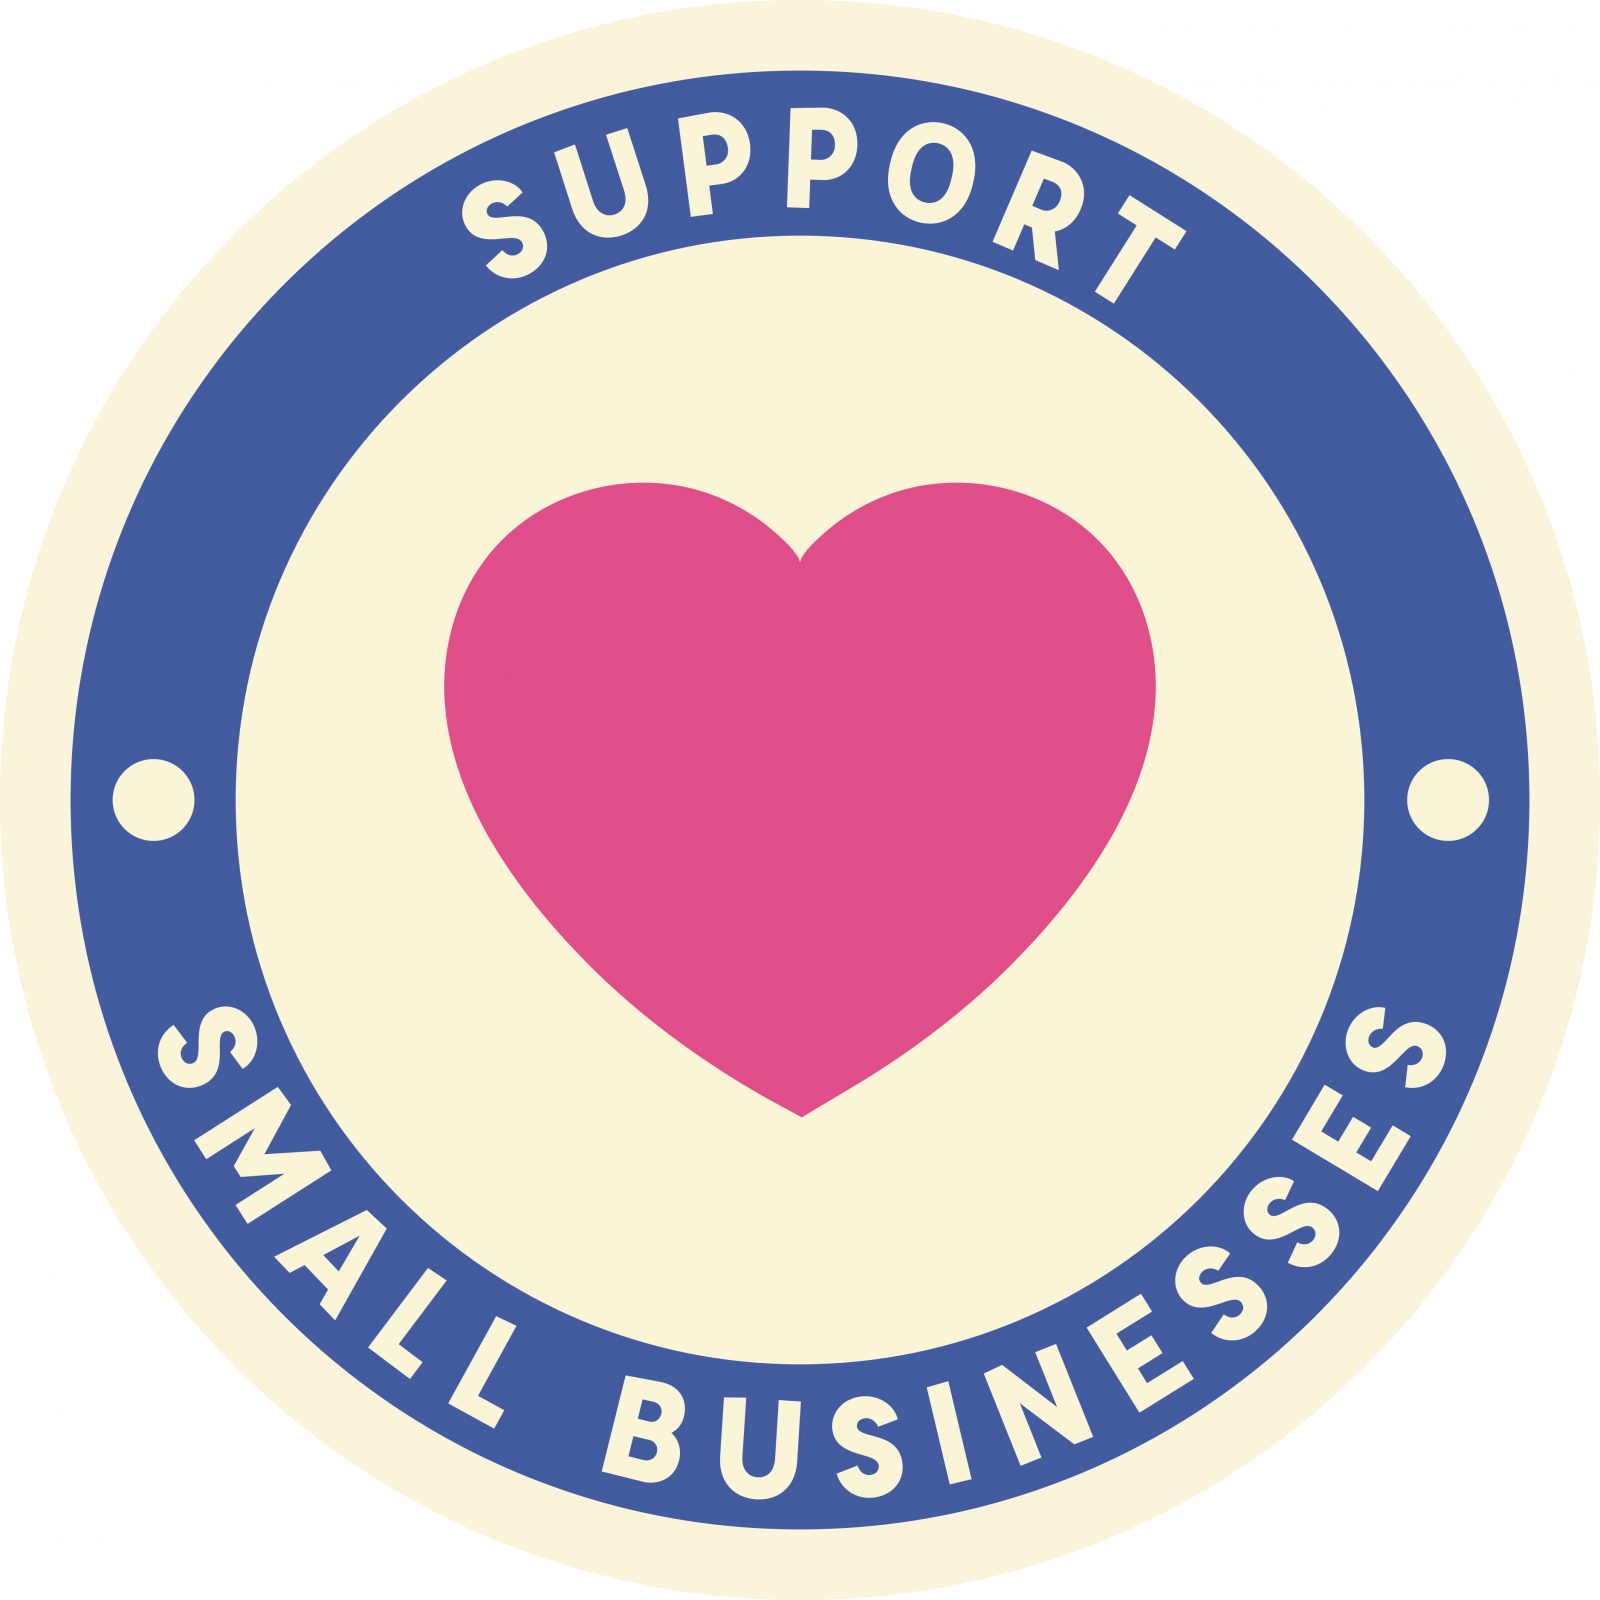 A blue circle with a pink heart in the middle and the words support small business on the edge of the blue circle.